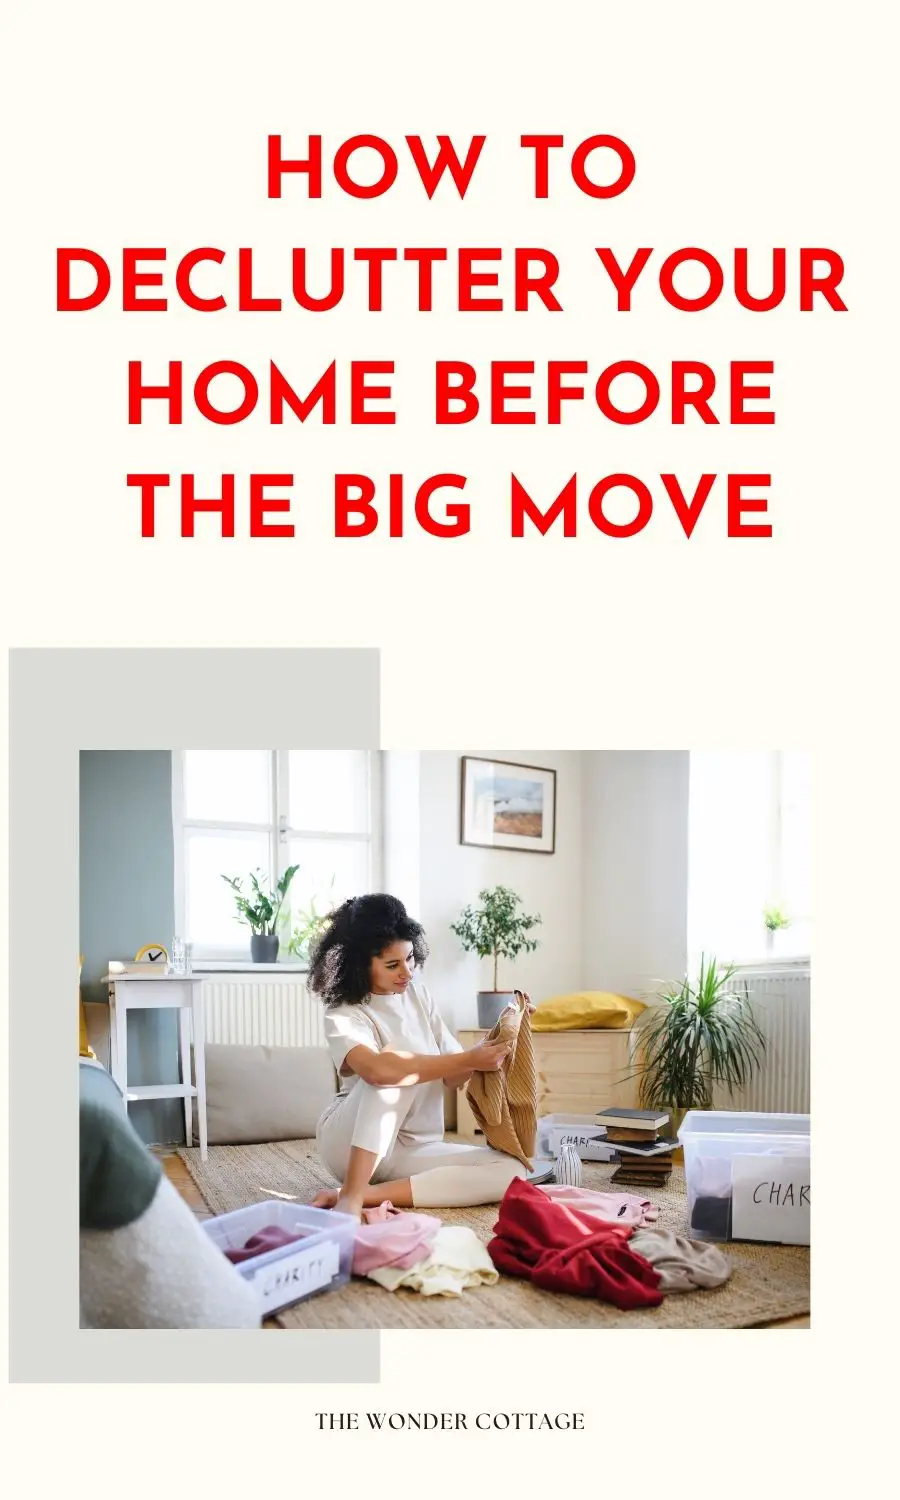 How To Declutter Your Home Before The Big Move